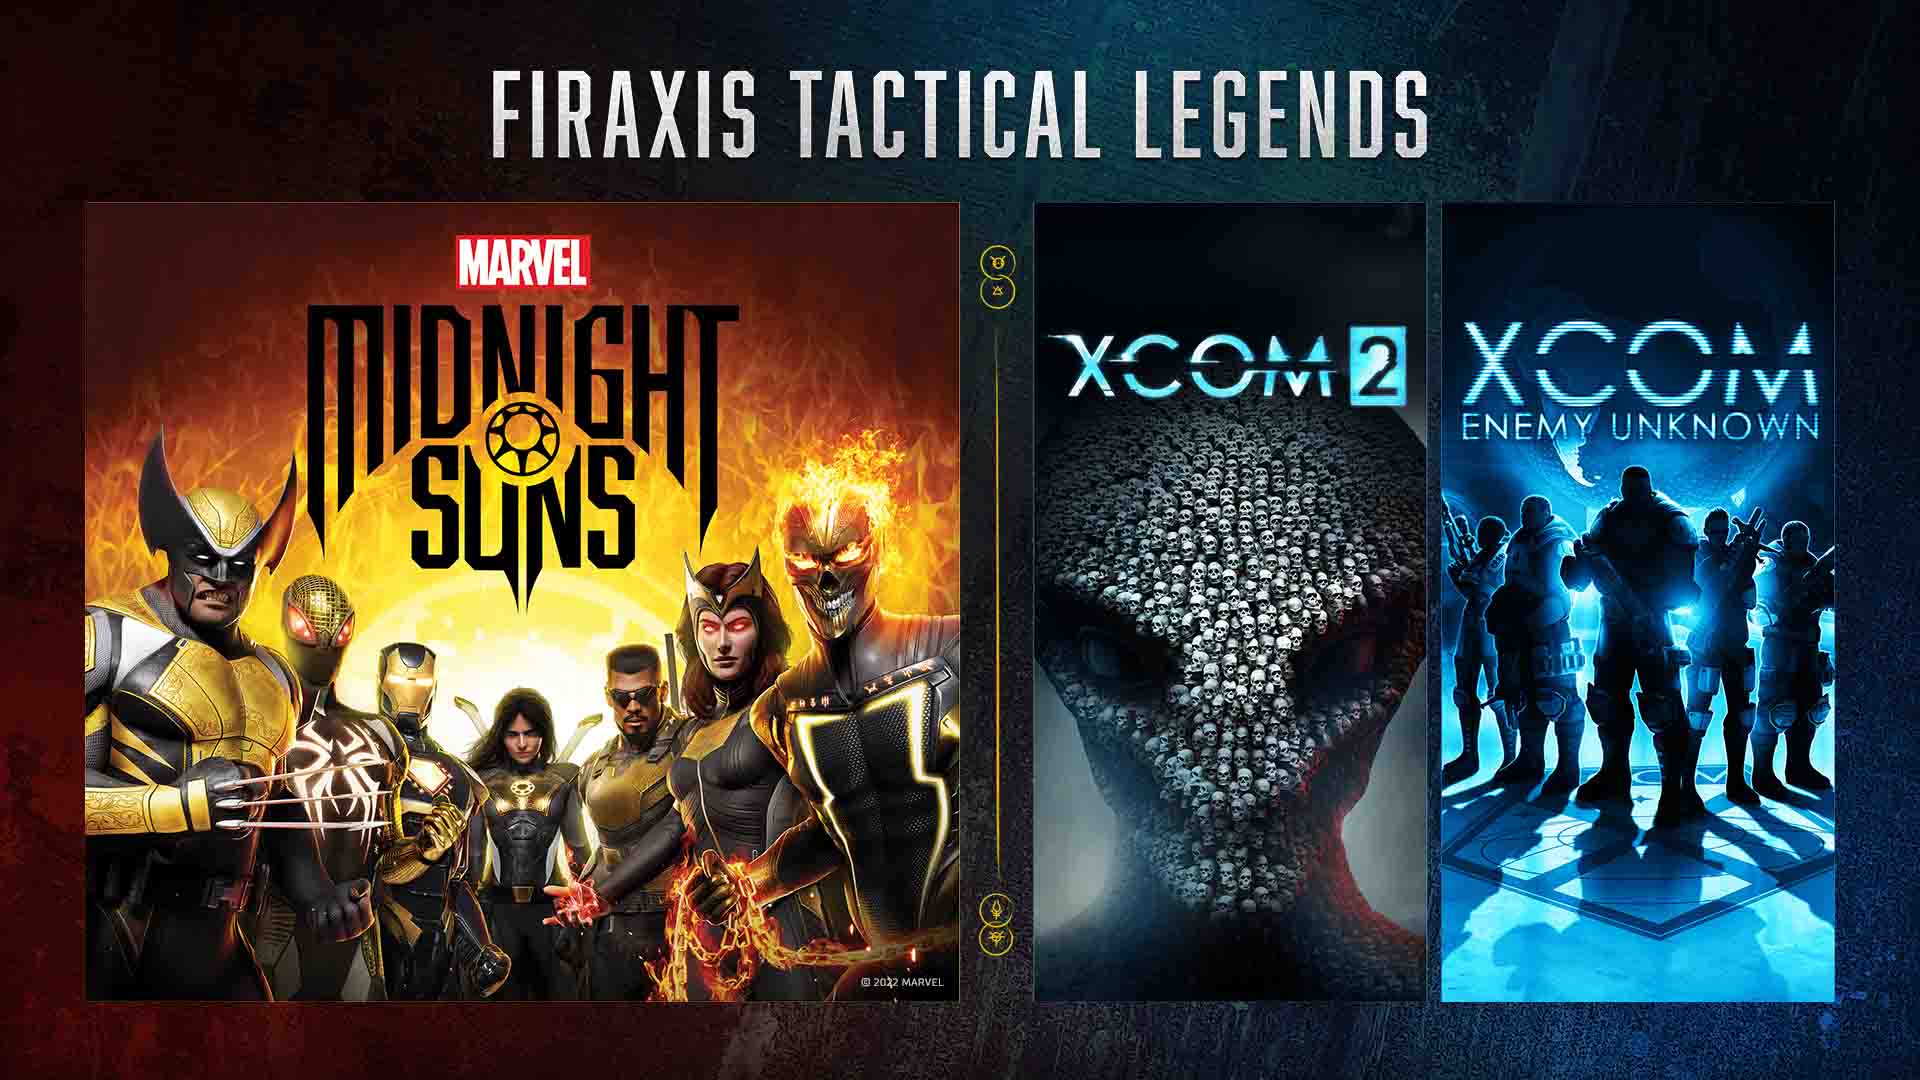 Marvel's Midnight Suns Launches Globally and Is Available to Play Now